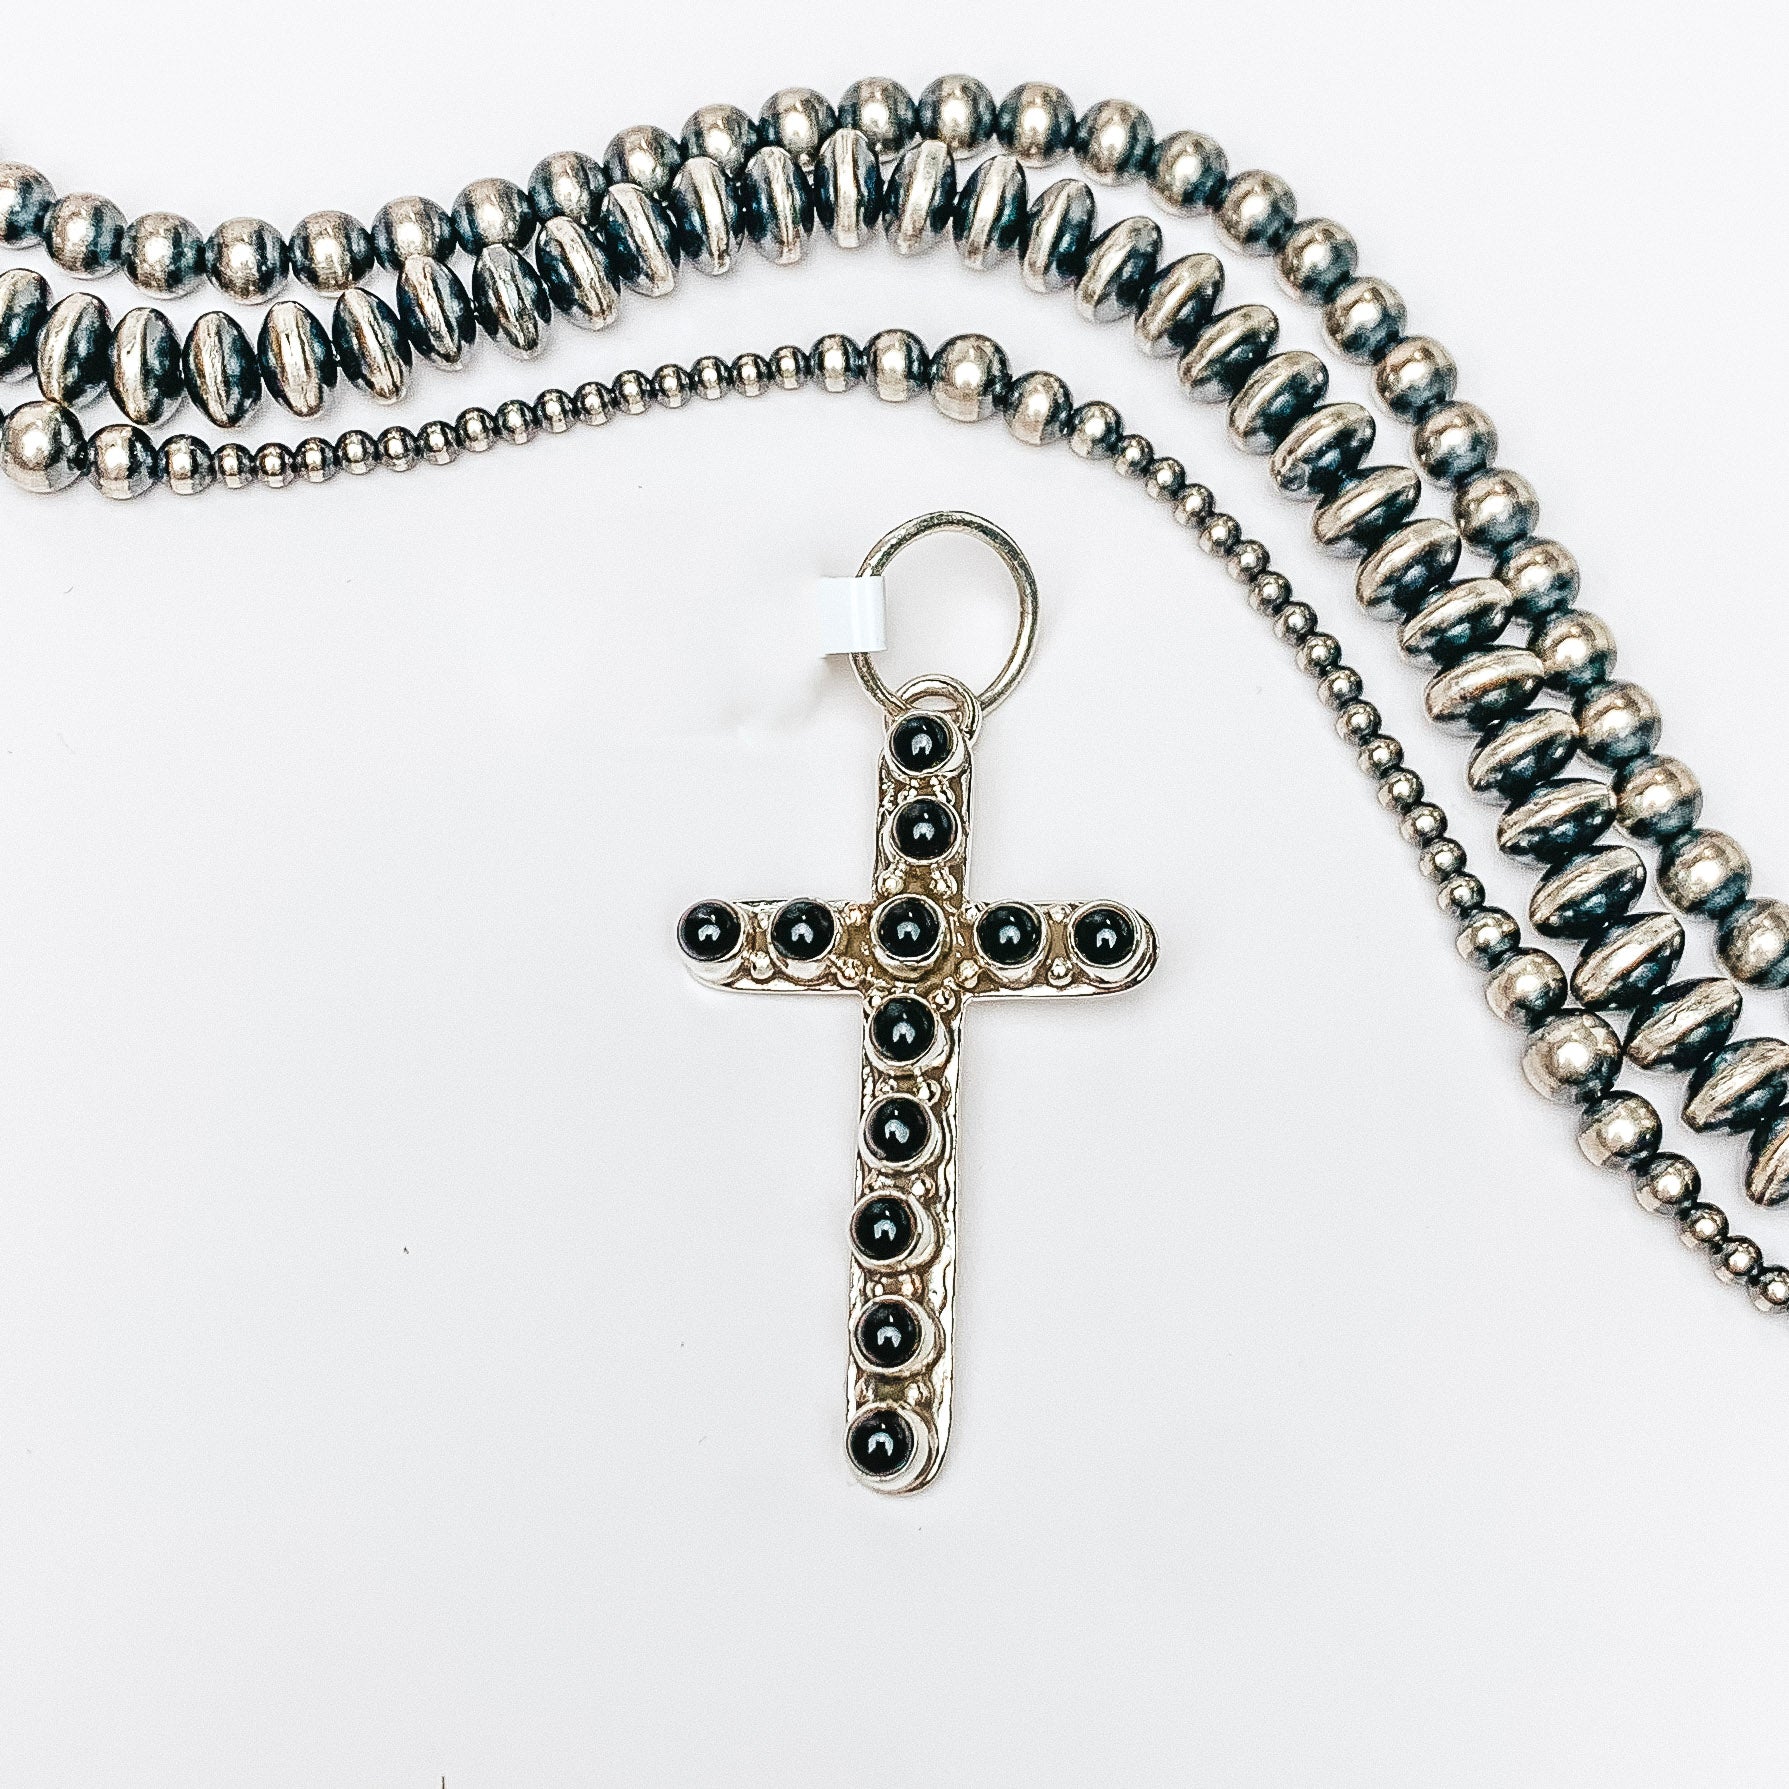 Centered in the picture is a small cross pendant with black onyx stones. Navajo pearls are laid to the top of the pendant. ALl on a white background. 